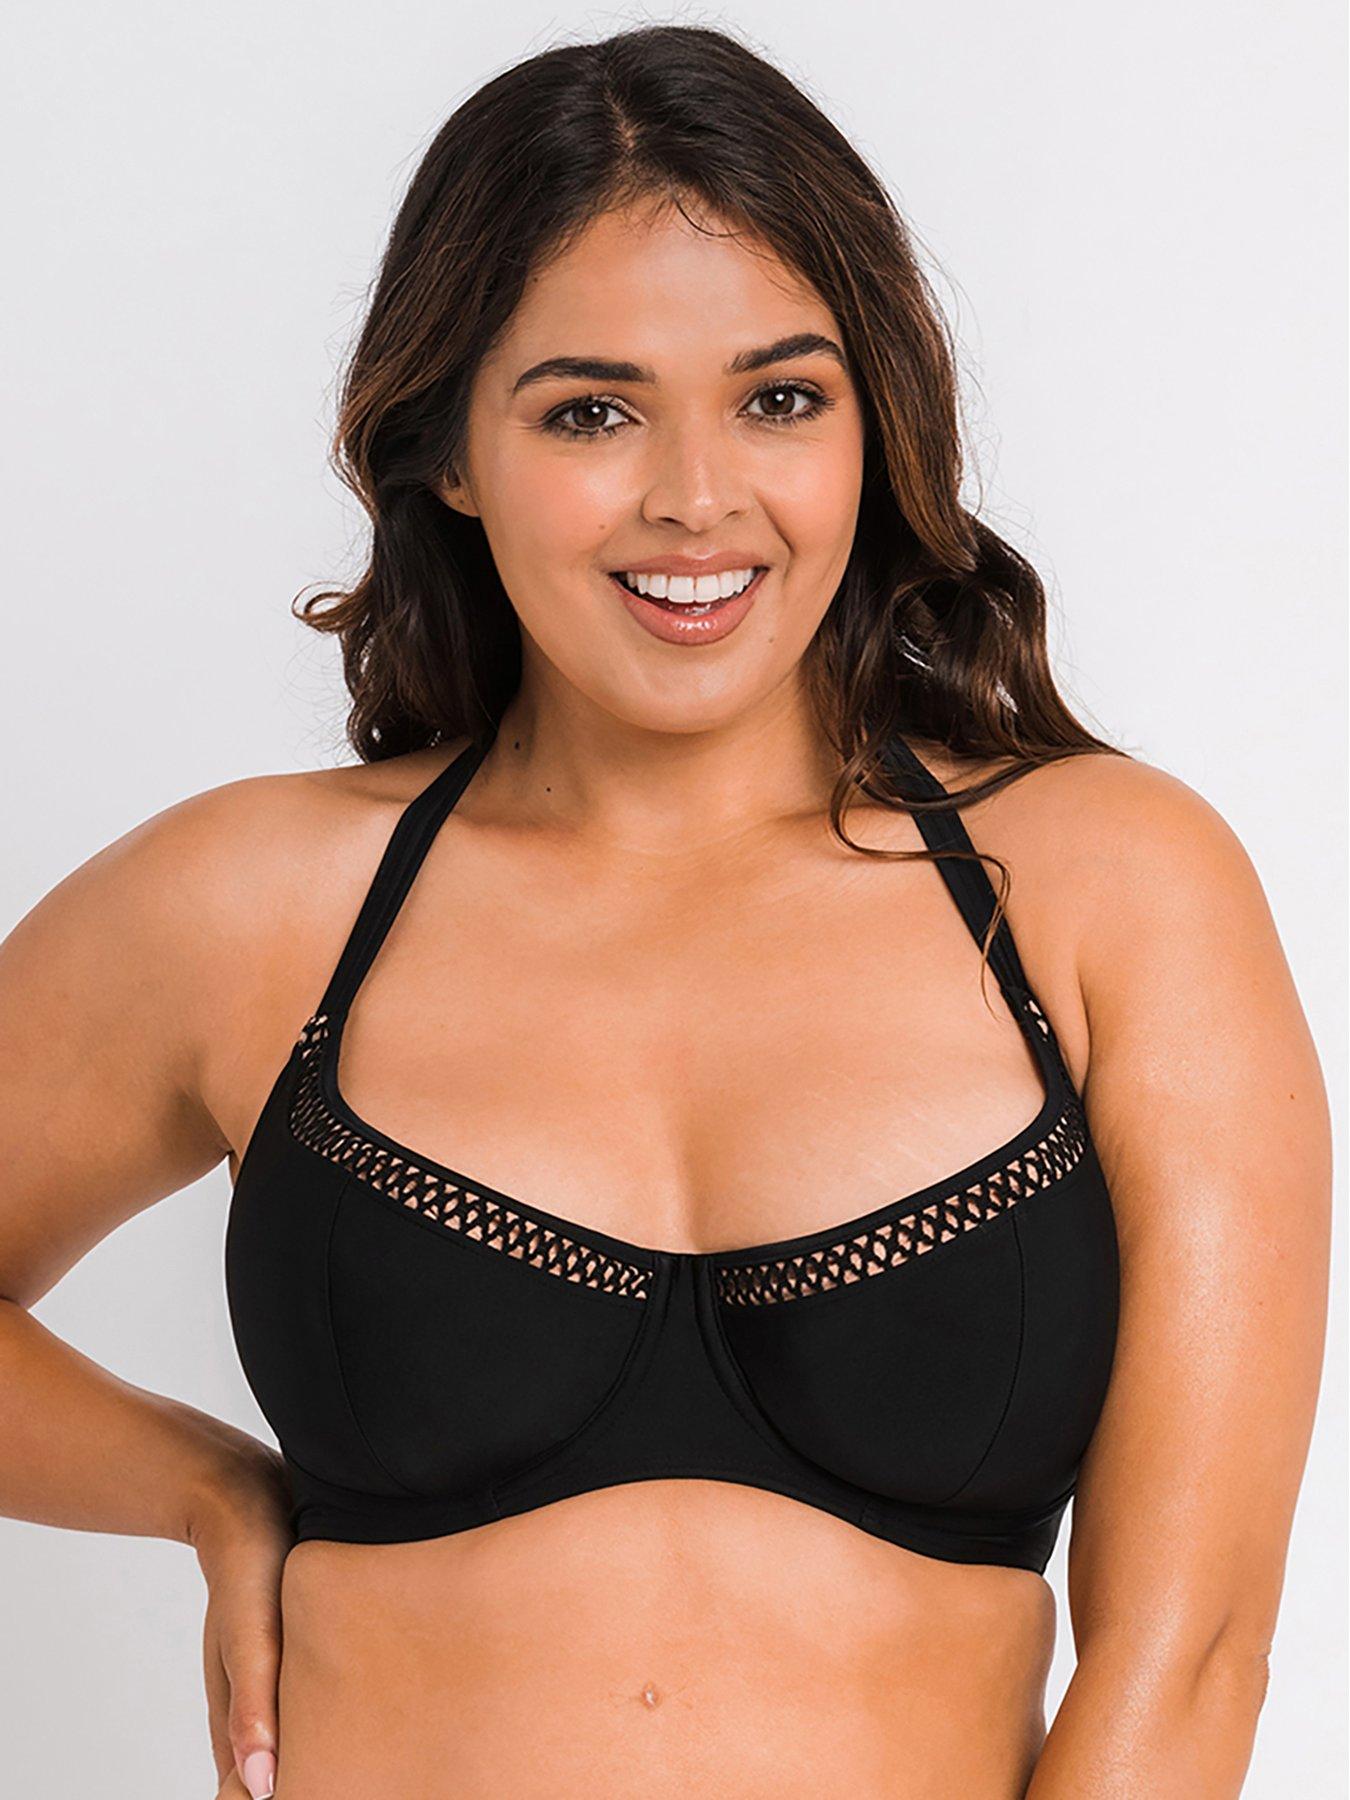 Lidl Ireland selling nursing bras for just €14.99 & they come in